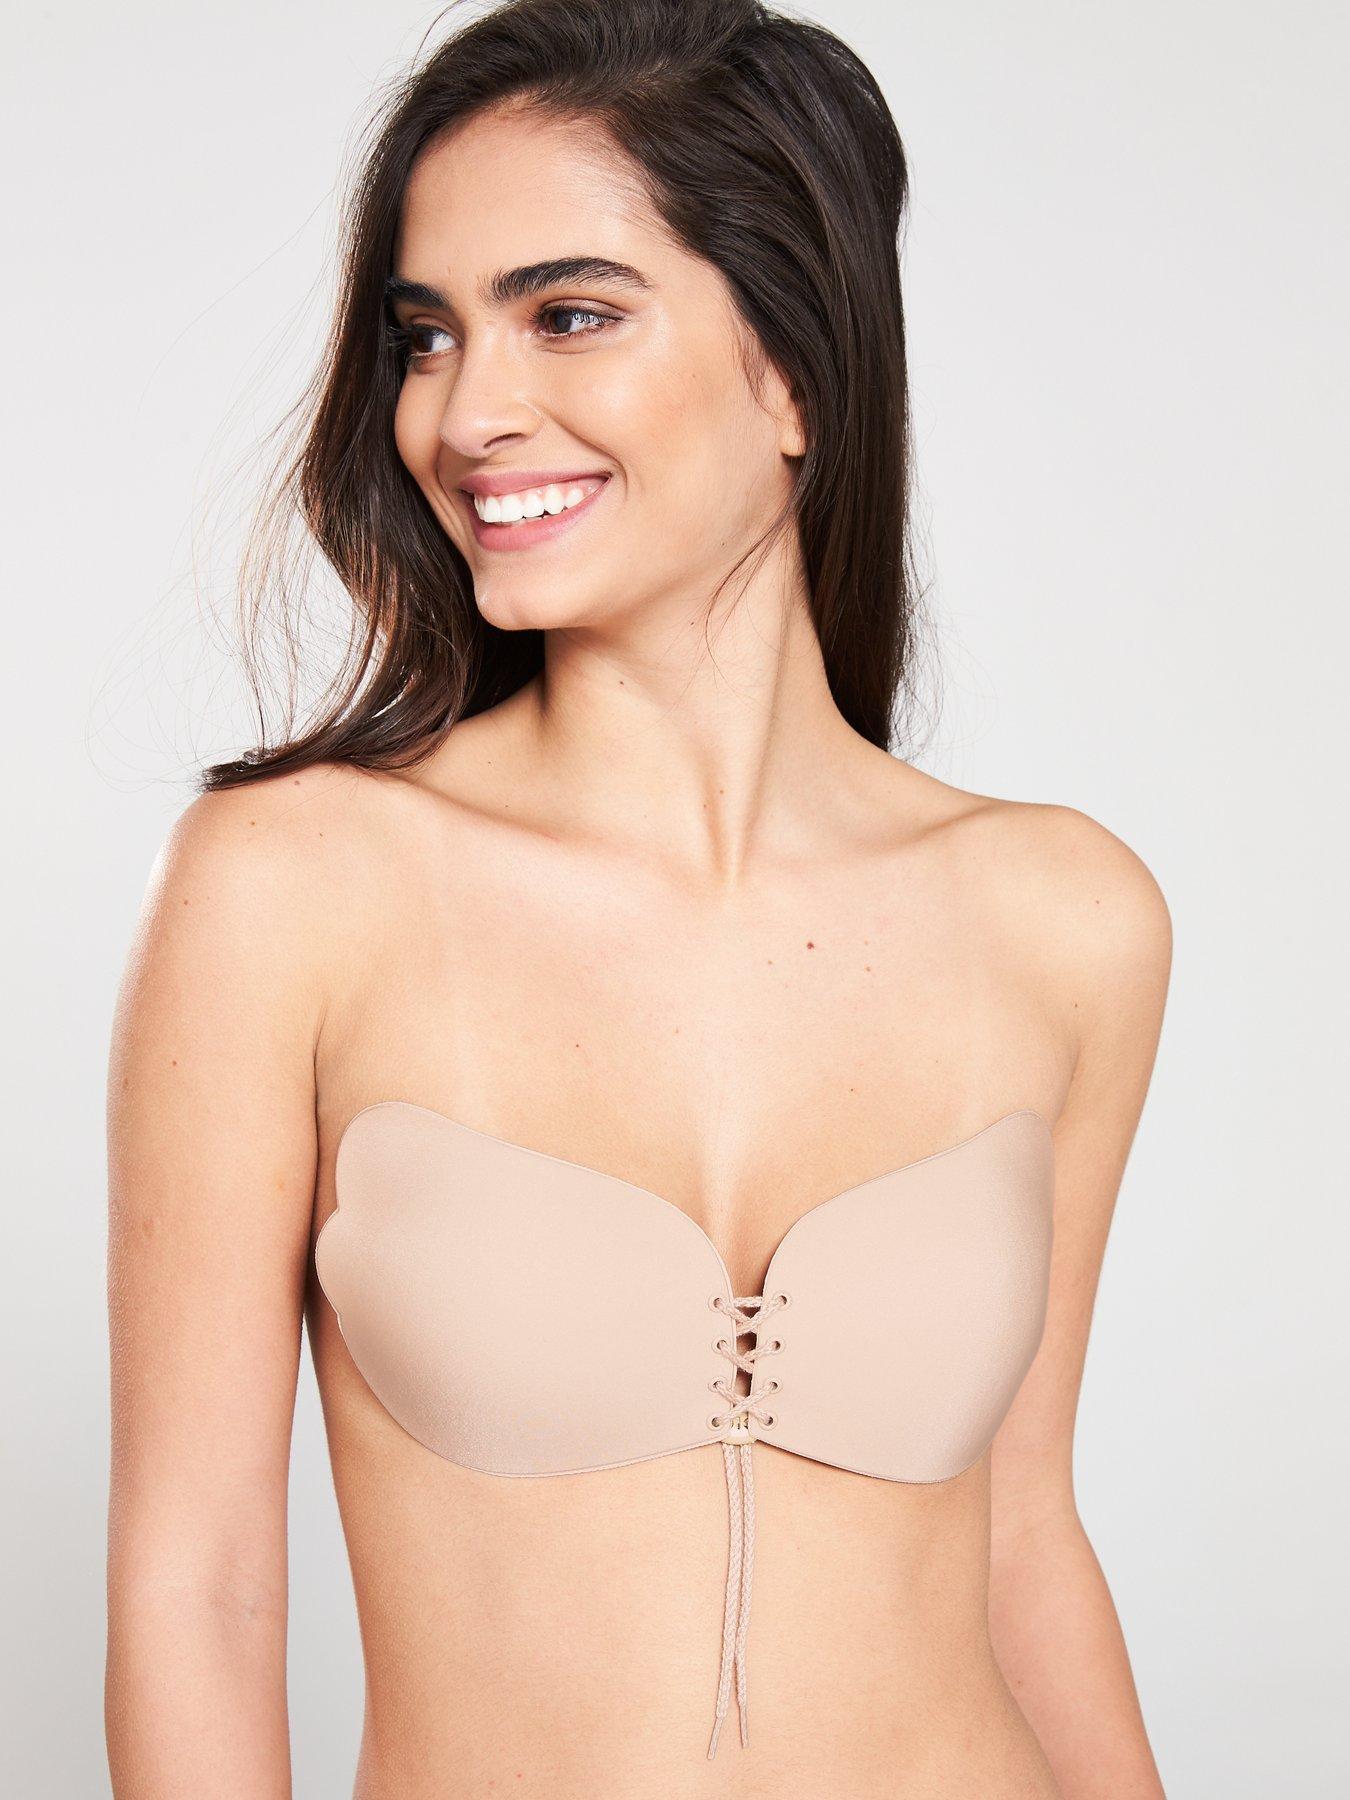 This backless strapless cleavage-boosting bra will solve party wear woes  but it'll set you back £26.50